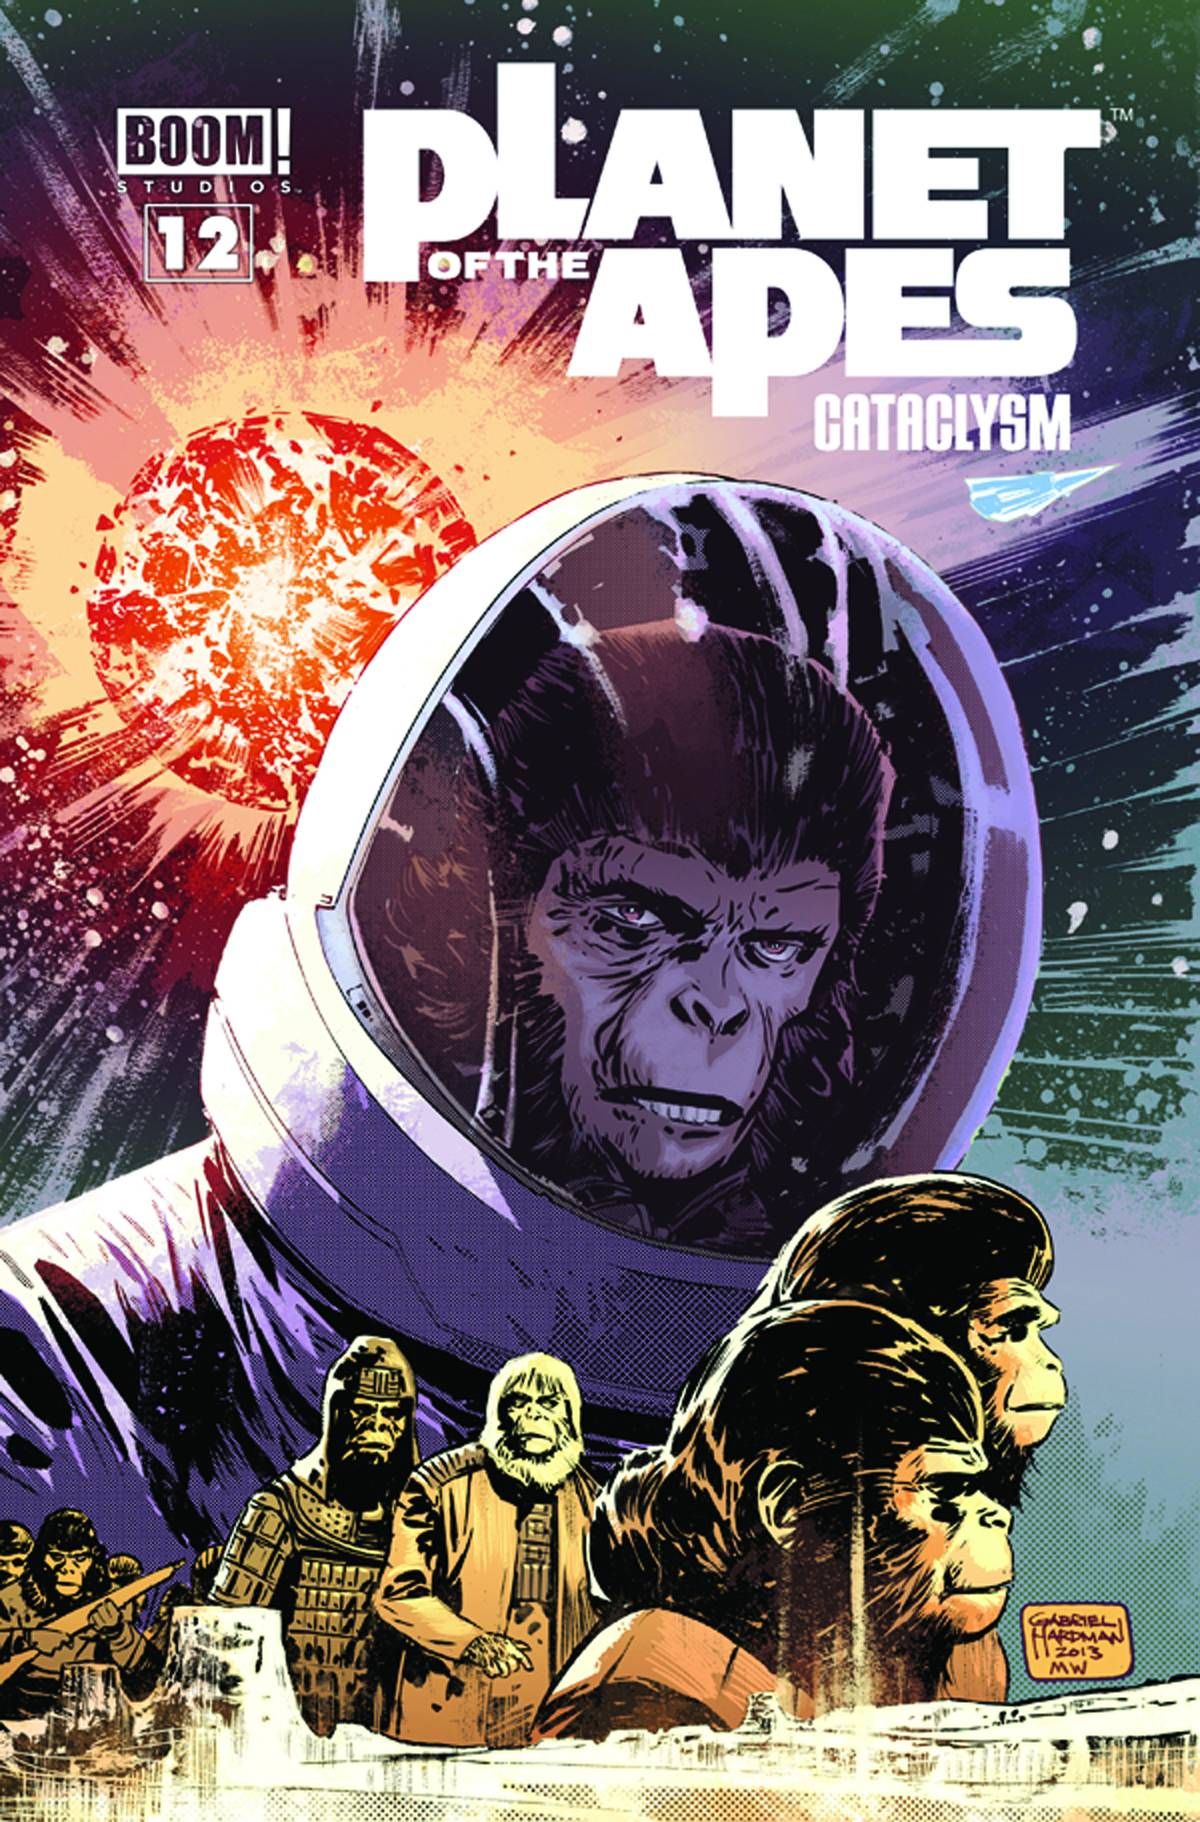 Planet of the Apes: Cataclysm #12 Comic